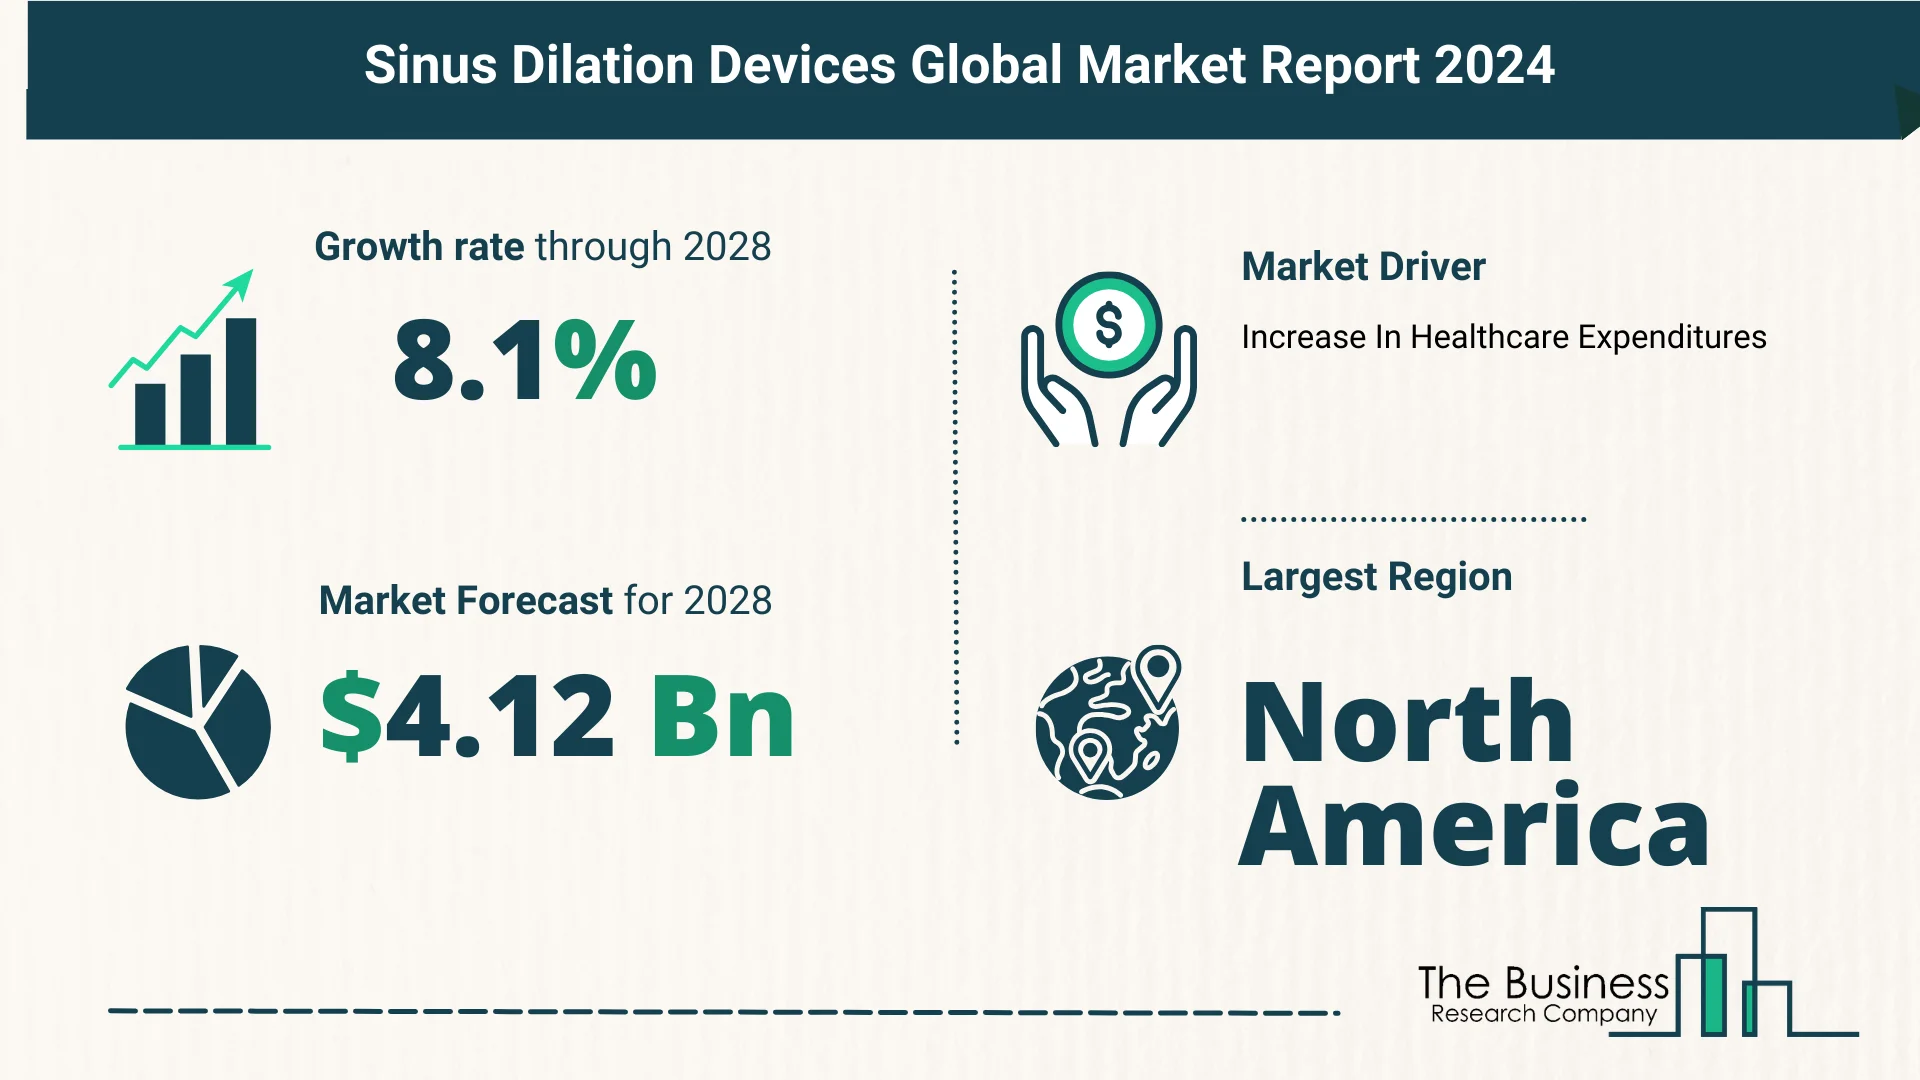 What Is The Forecast Growth Rate For The Sinus Dilation Devices Market?